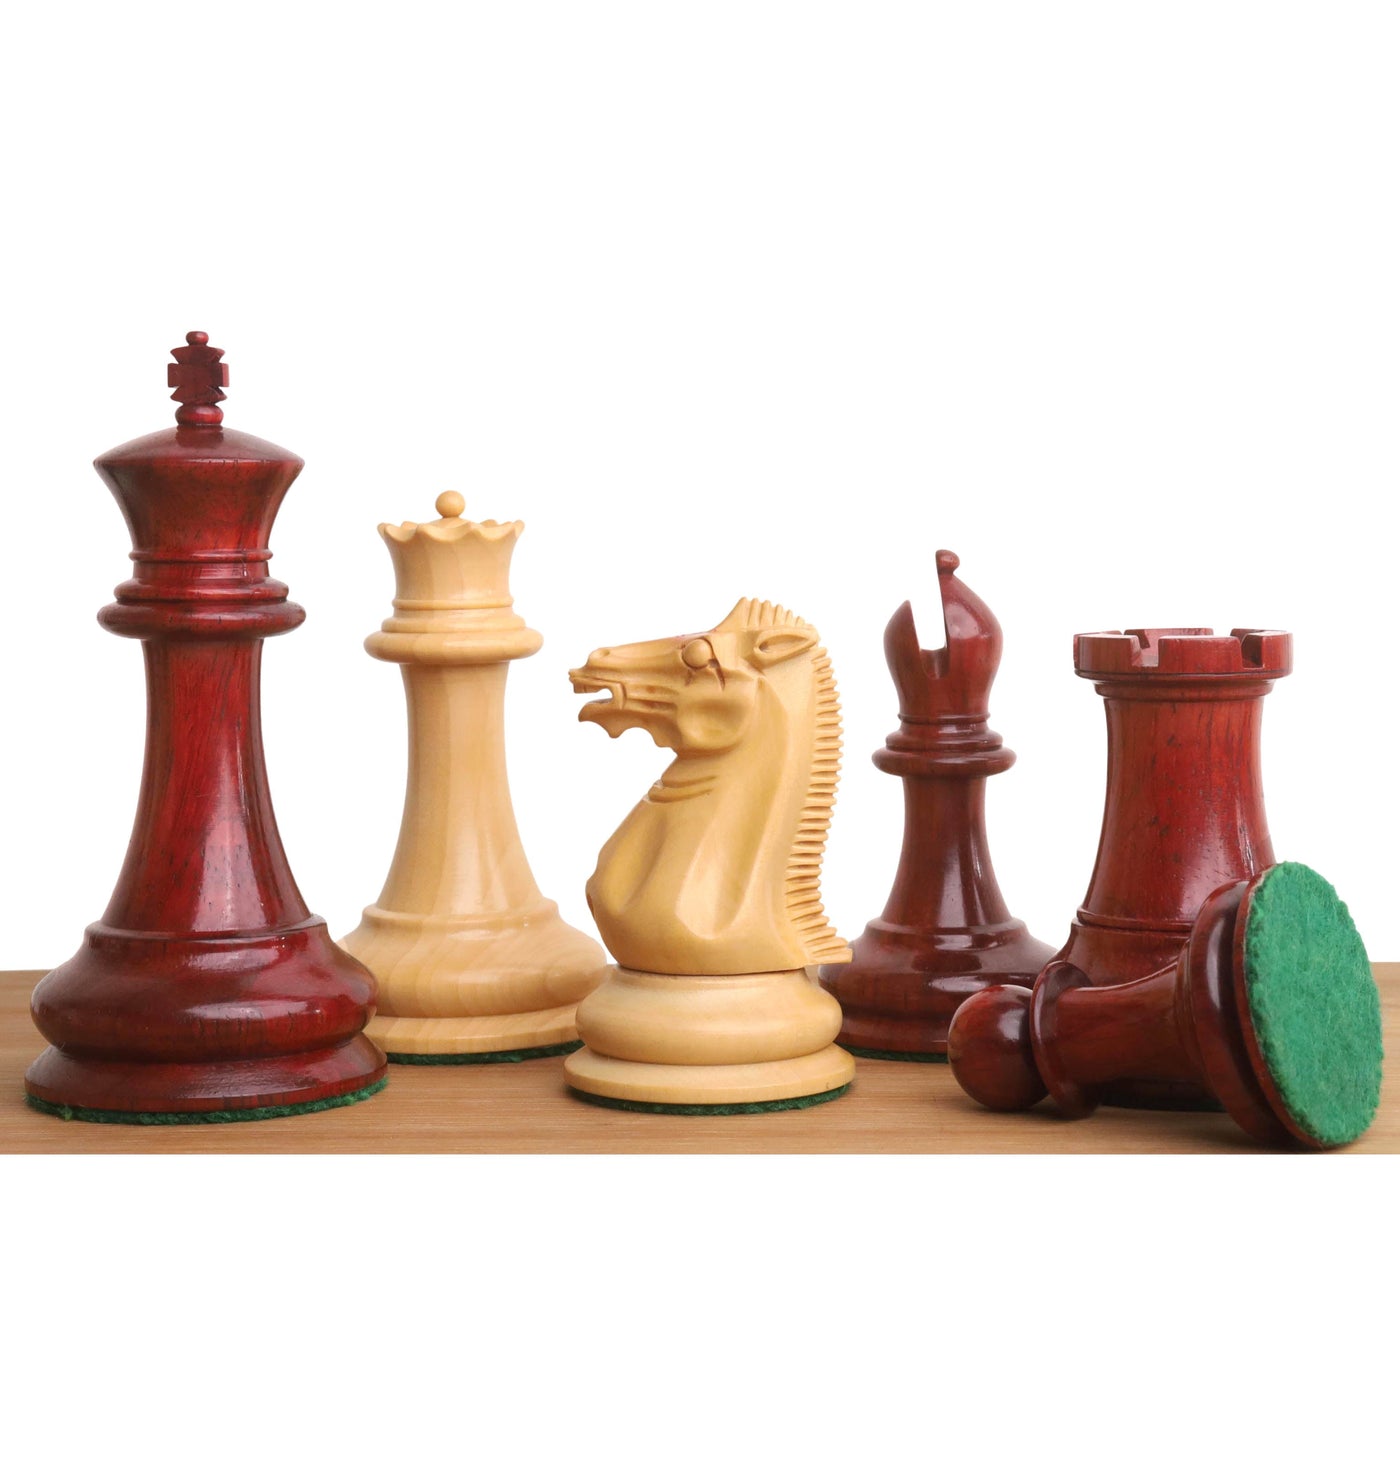 Slightly Imperfect 1849 Jacques Cook Staunton Collectors Chess Set - Chess Pieces Only- Bud Rosewood - 3.75"